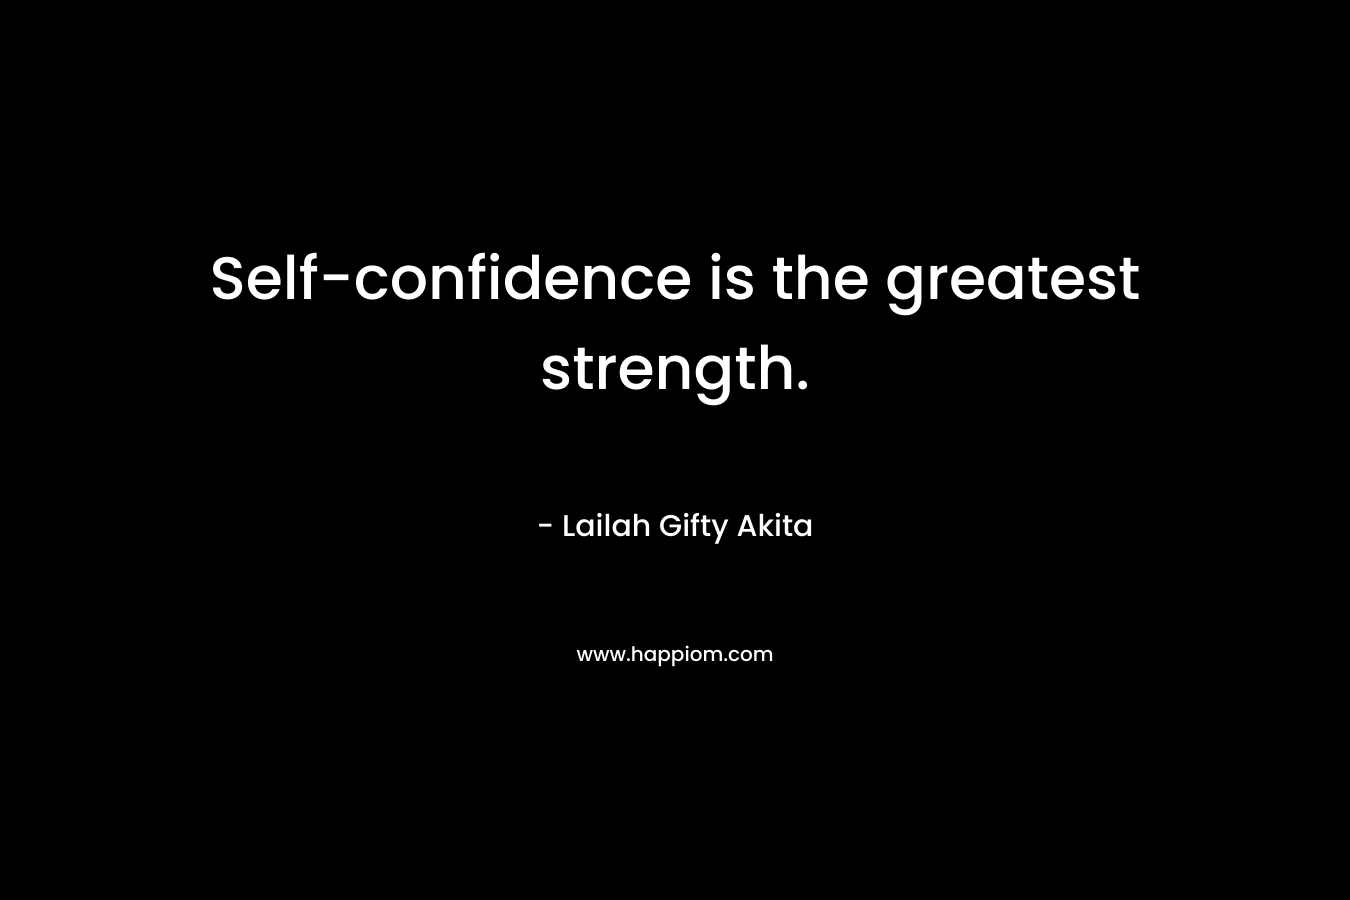 Self-confidence is the greatest strength.